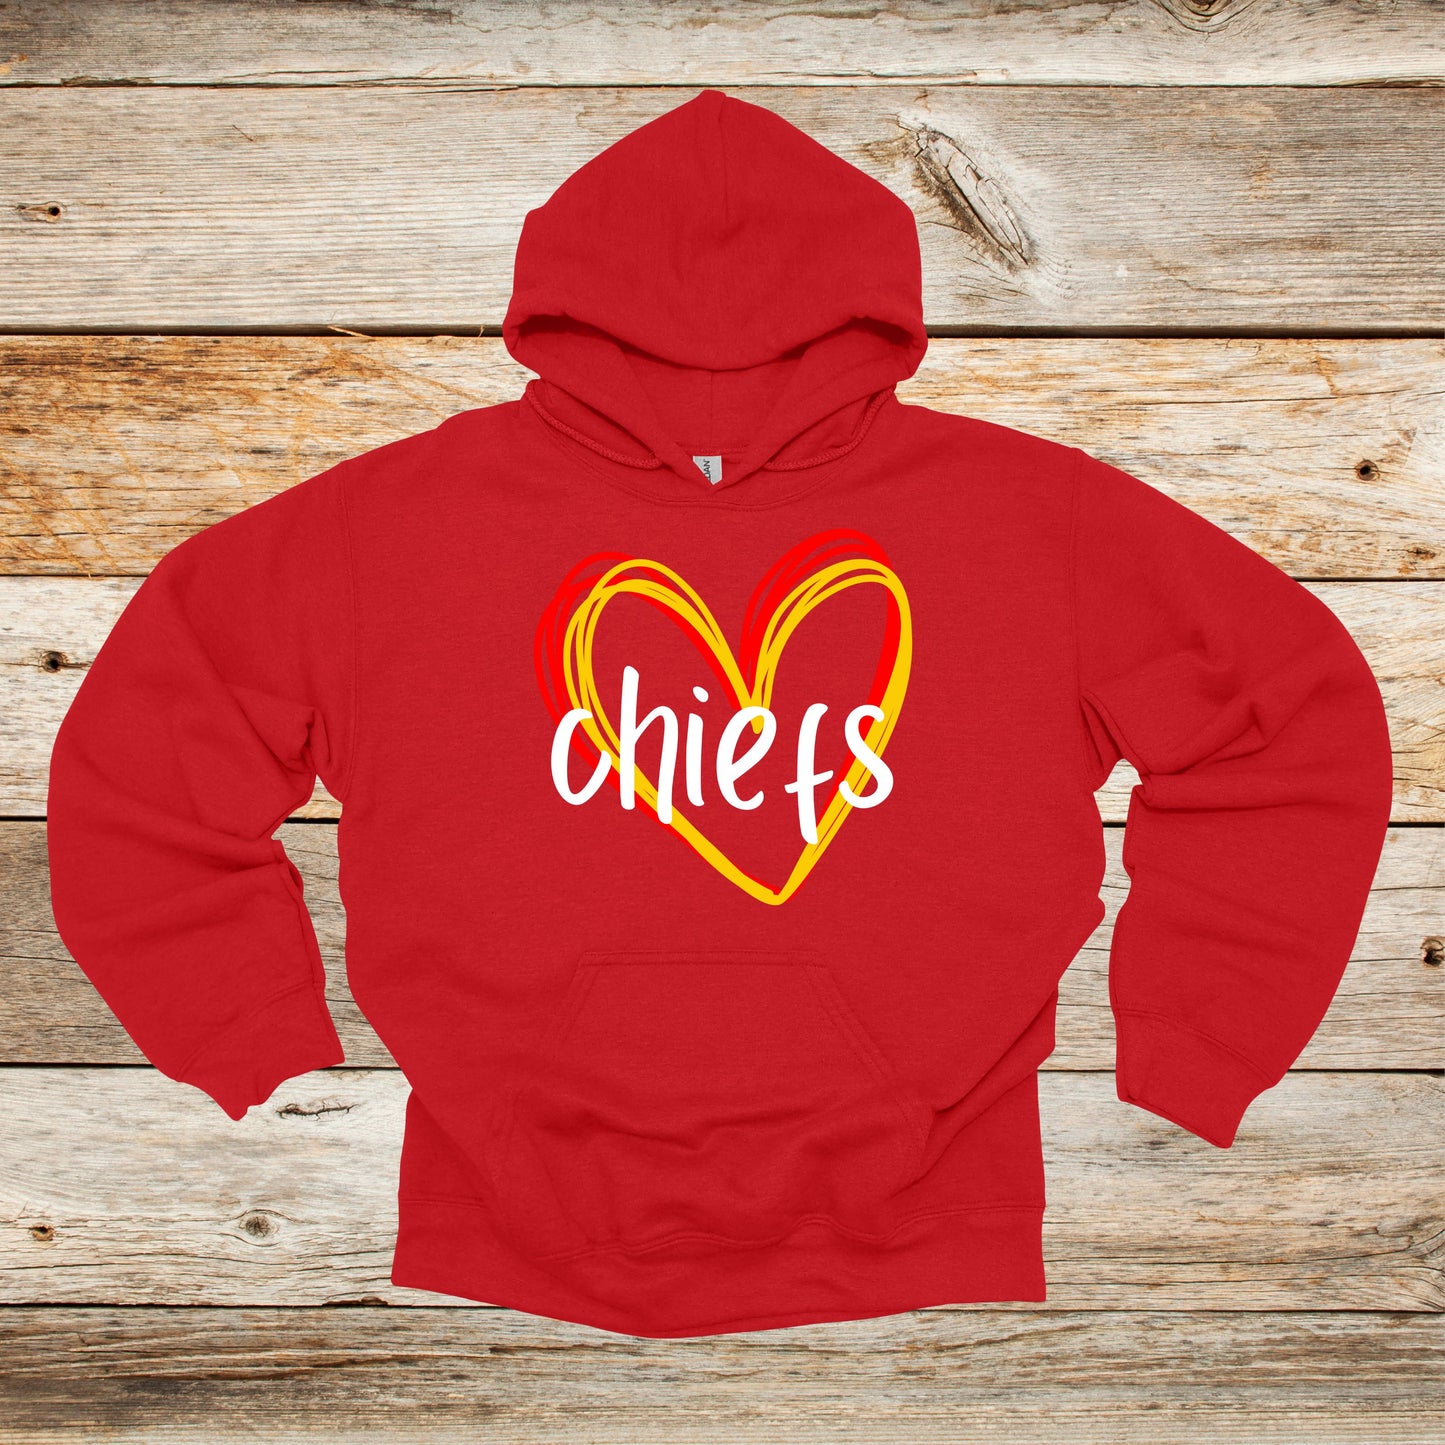 Football Crewneck and Hooded Sweatshirt - Chiefs Football - Adult and Children's Tee Shirts - Sports Hooded Sweatshirt Graphic Avenue Hooded Sweatshirt Red Adult Small